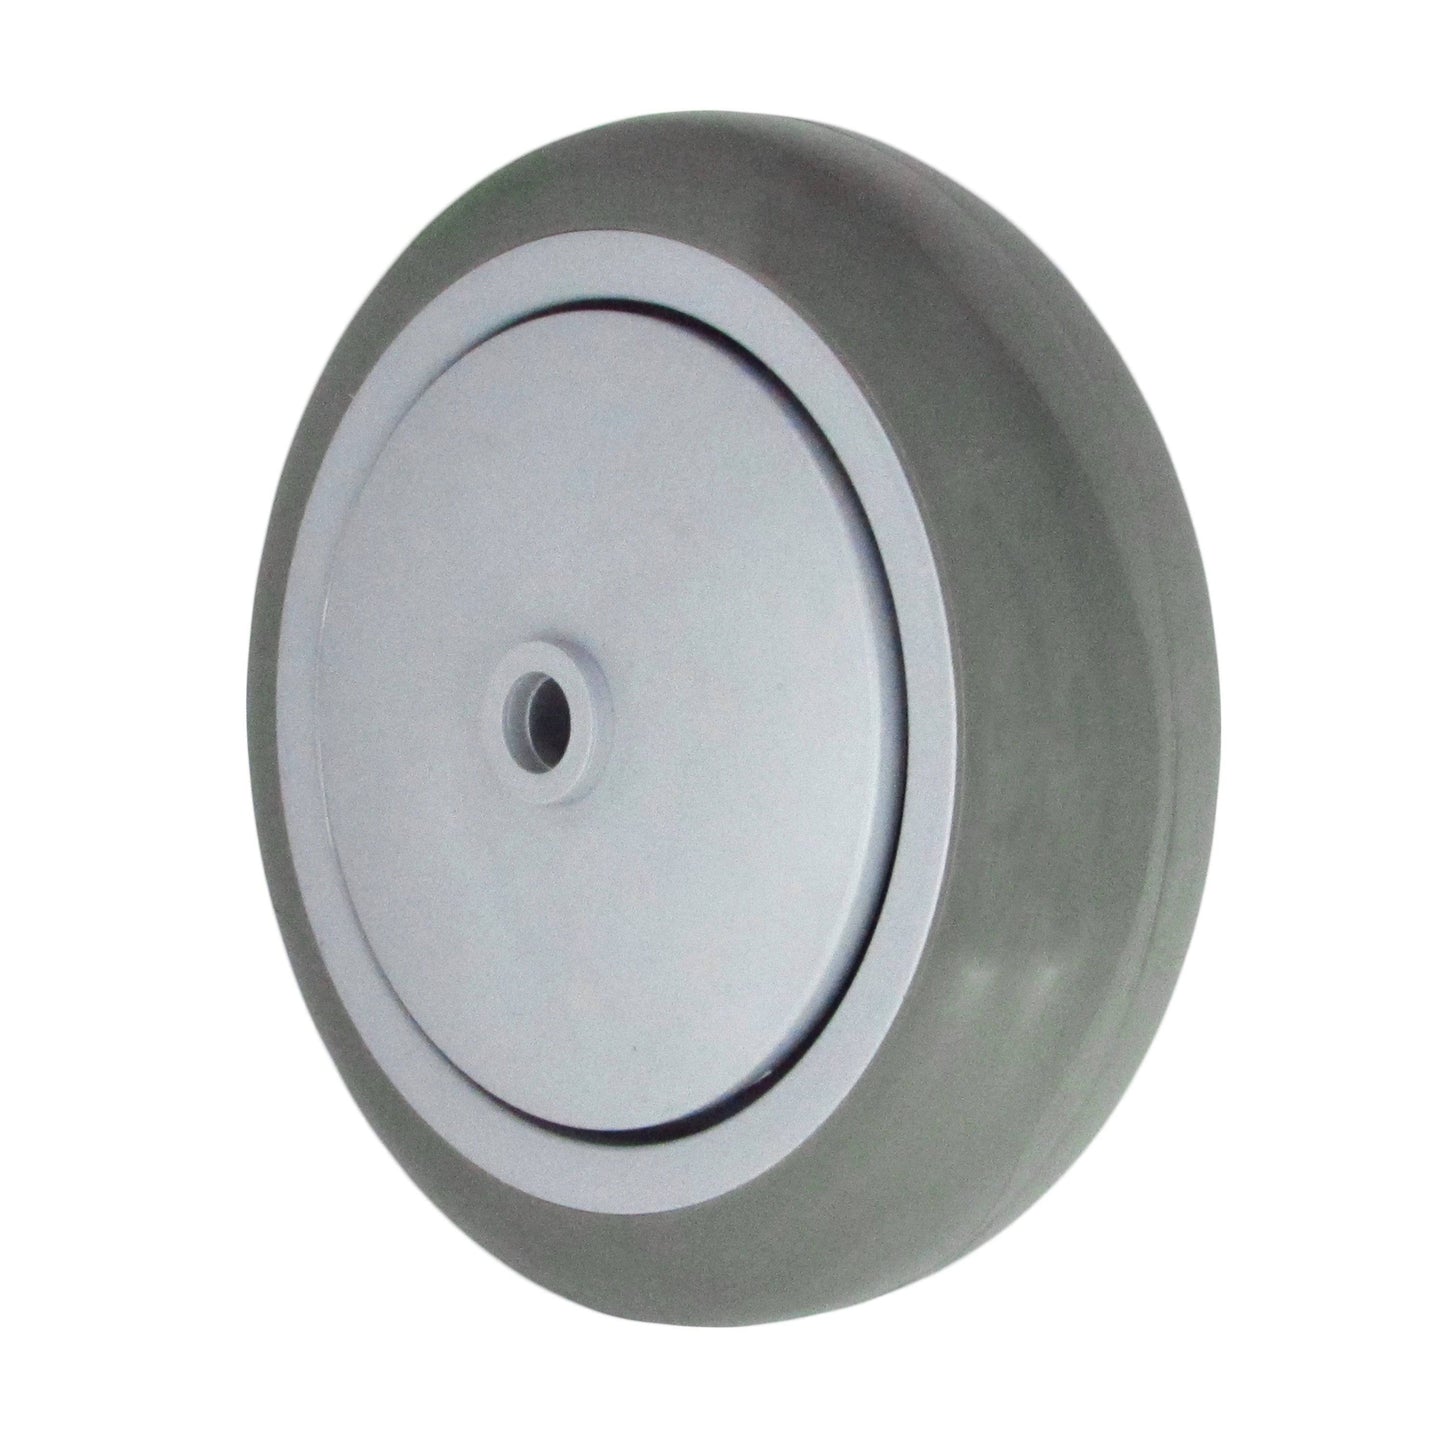 5" x 1-1/4 Poly-Pro Wheel Gray/Gray - 350 lbs. Capacity (4-Pack) - Durable Superior Casters